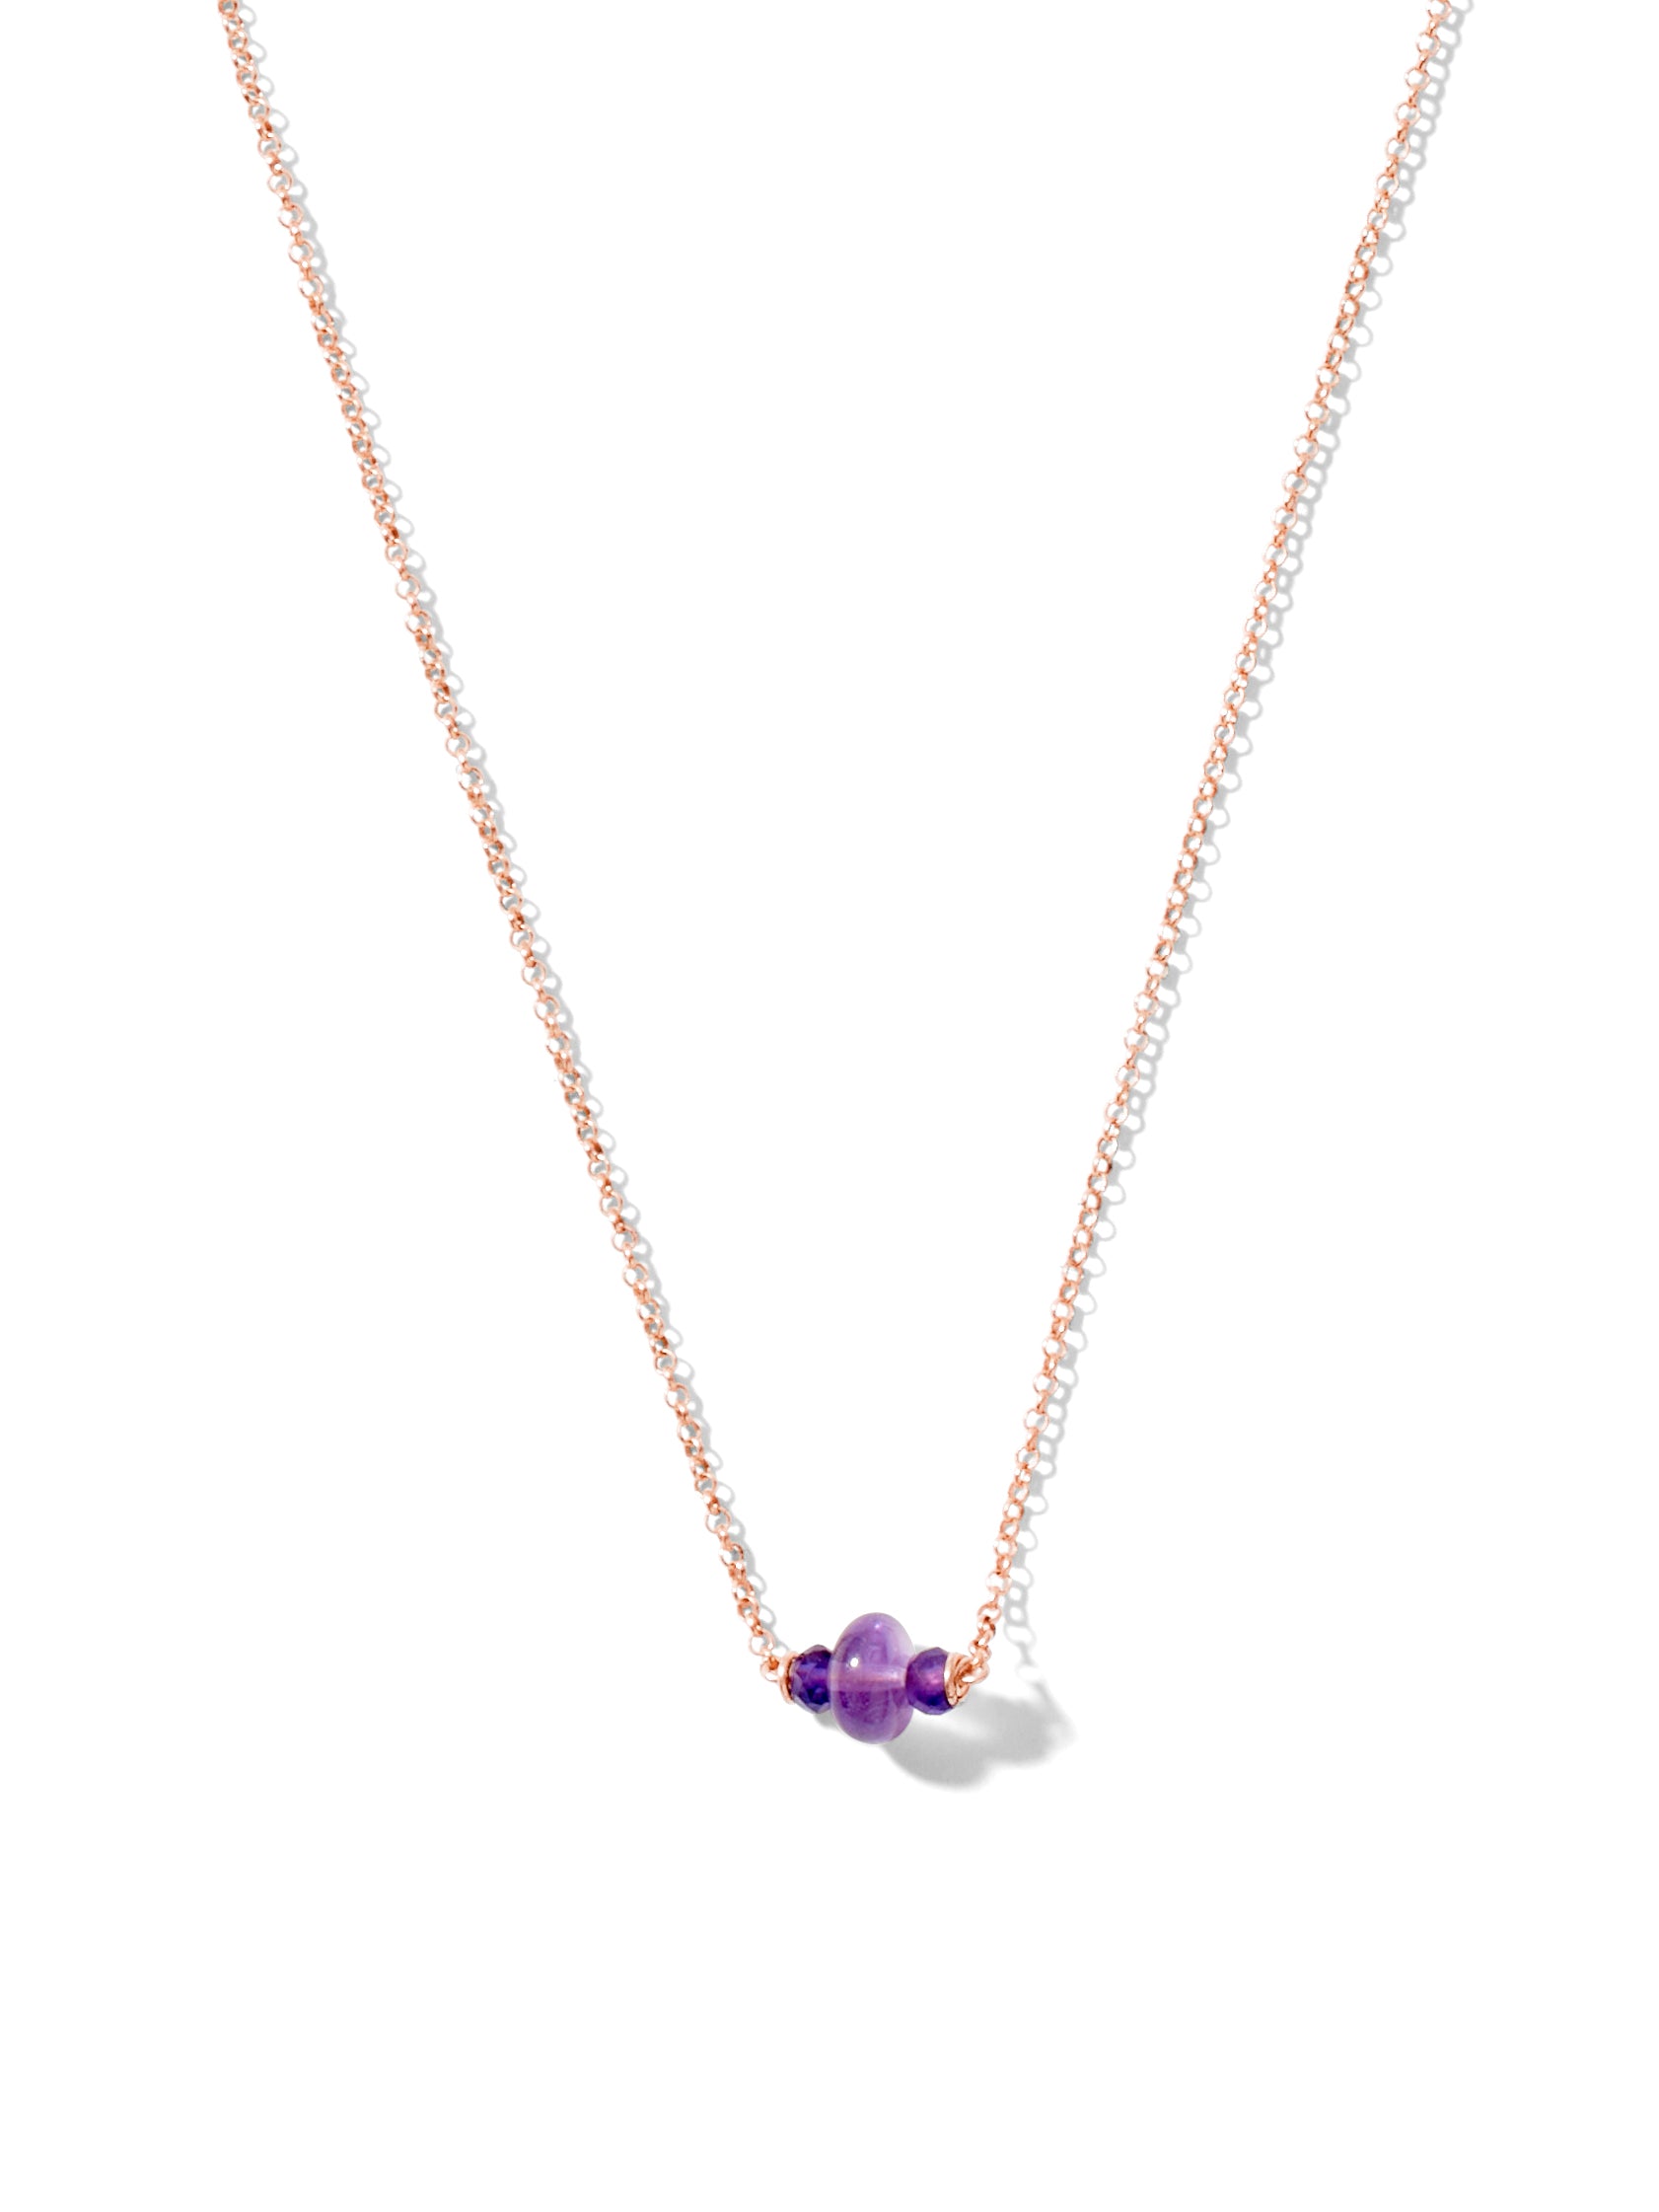 poise necklace | amethyst